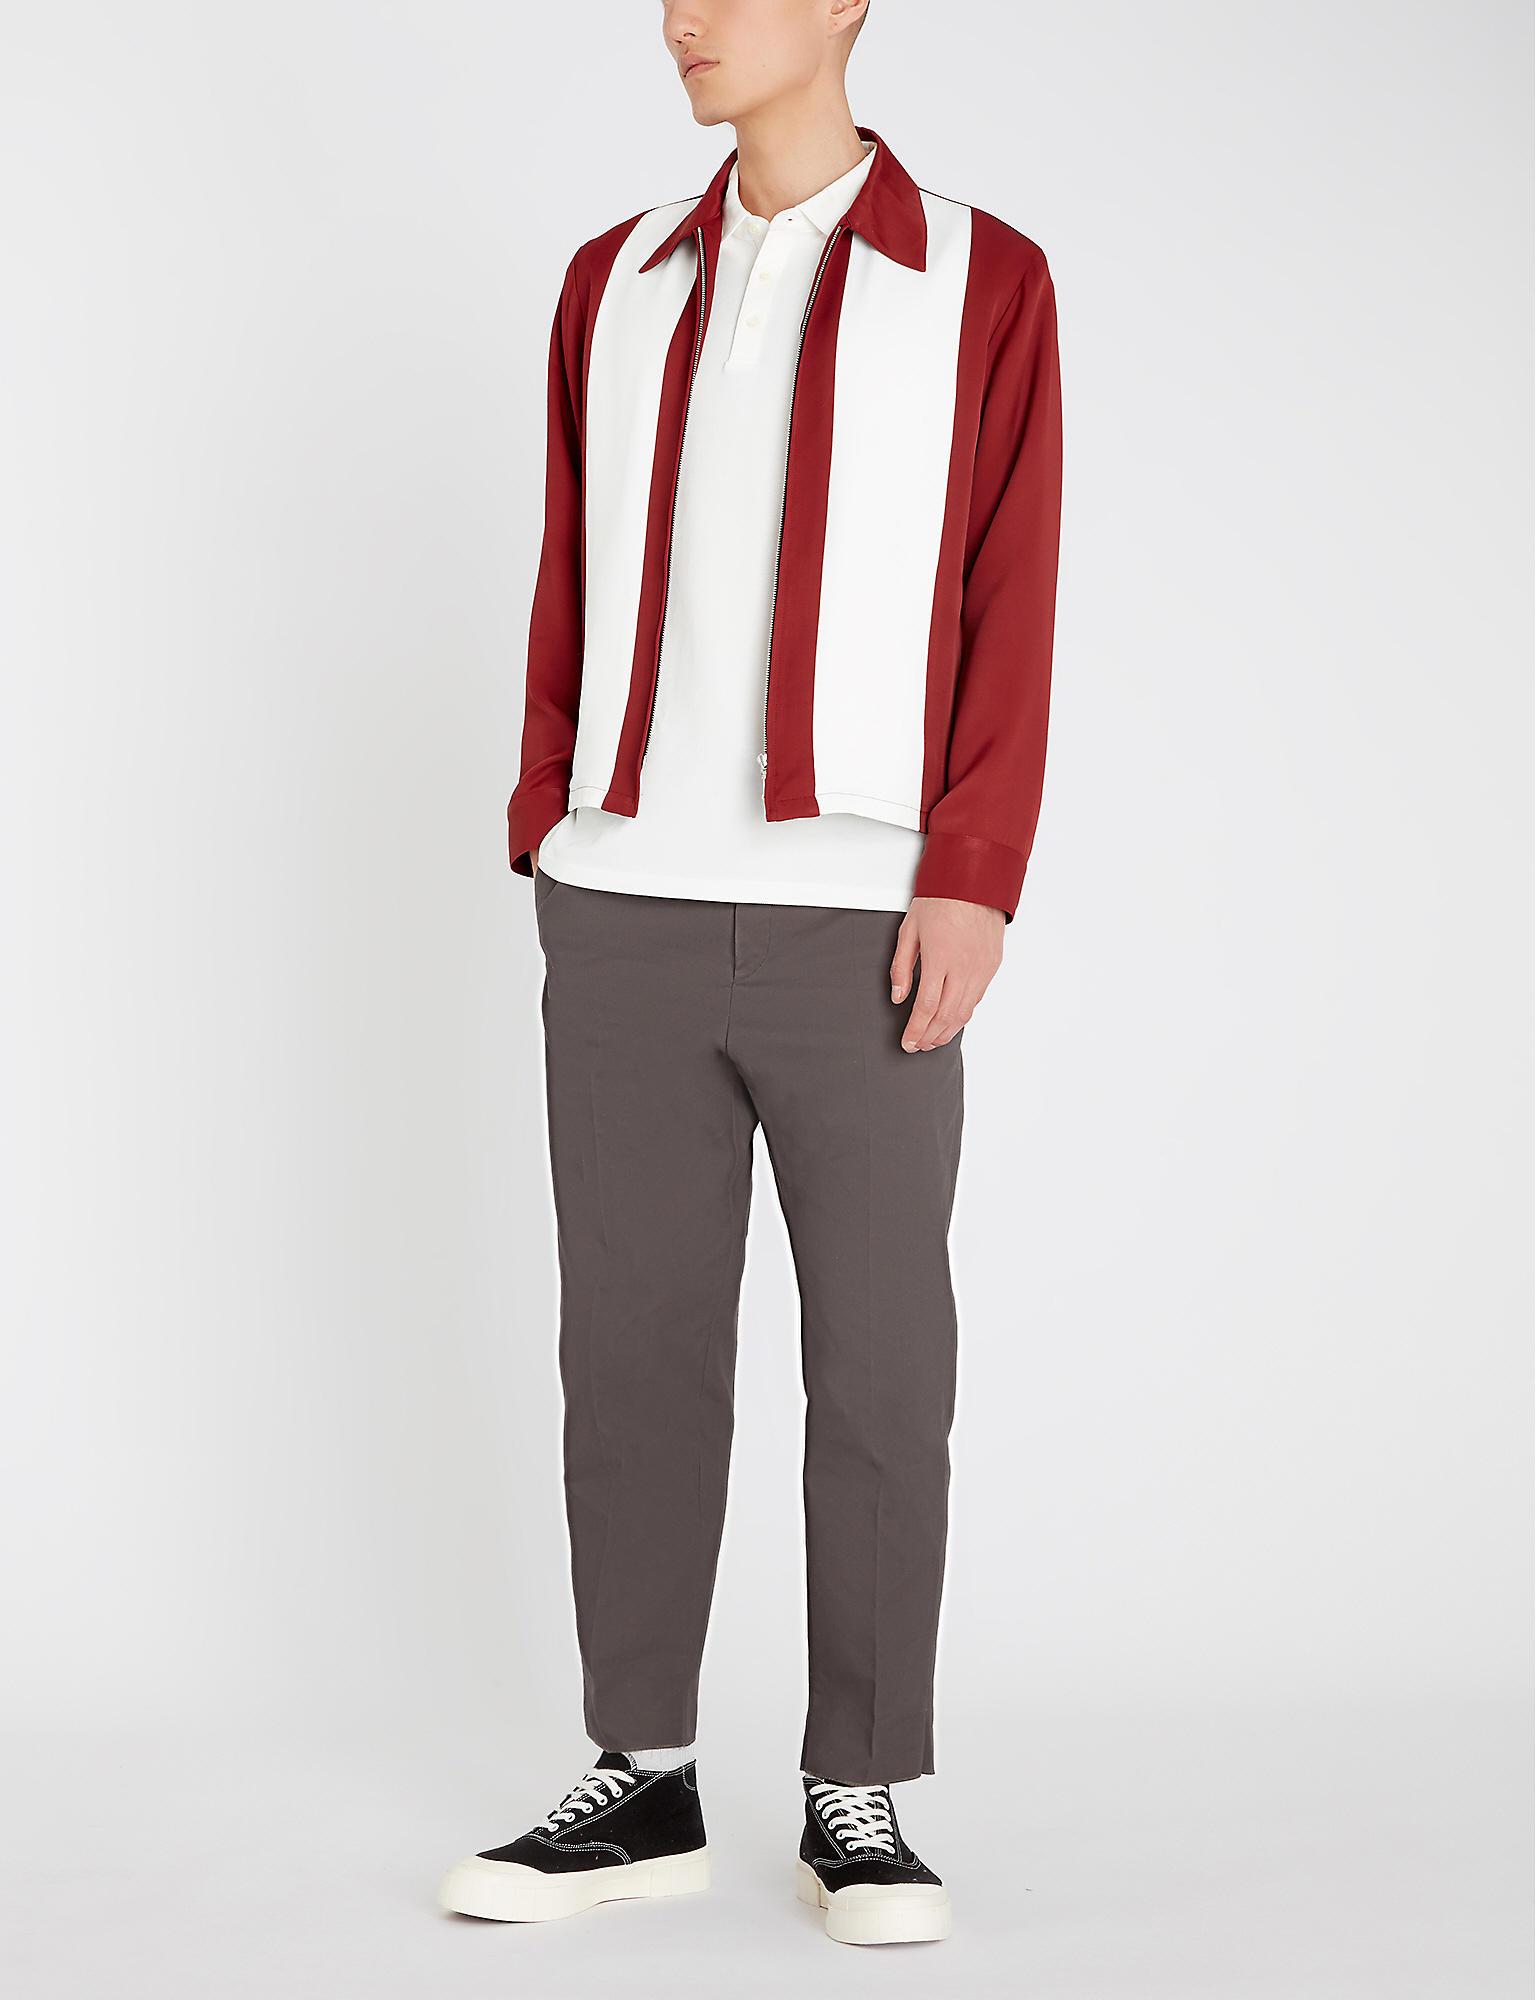 Sandro Synthetic Contrast Panel Bowling Jacket for Men - Lyst